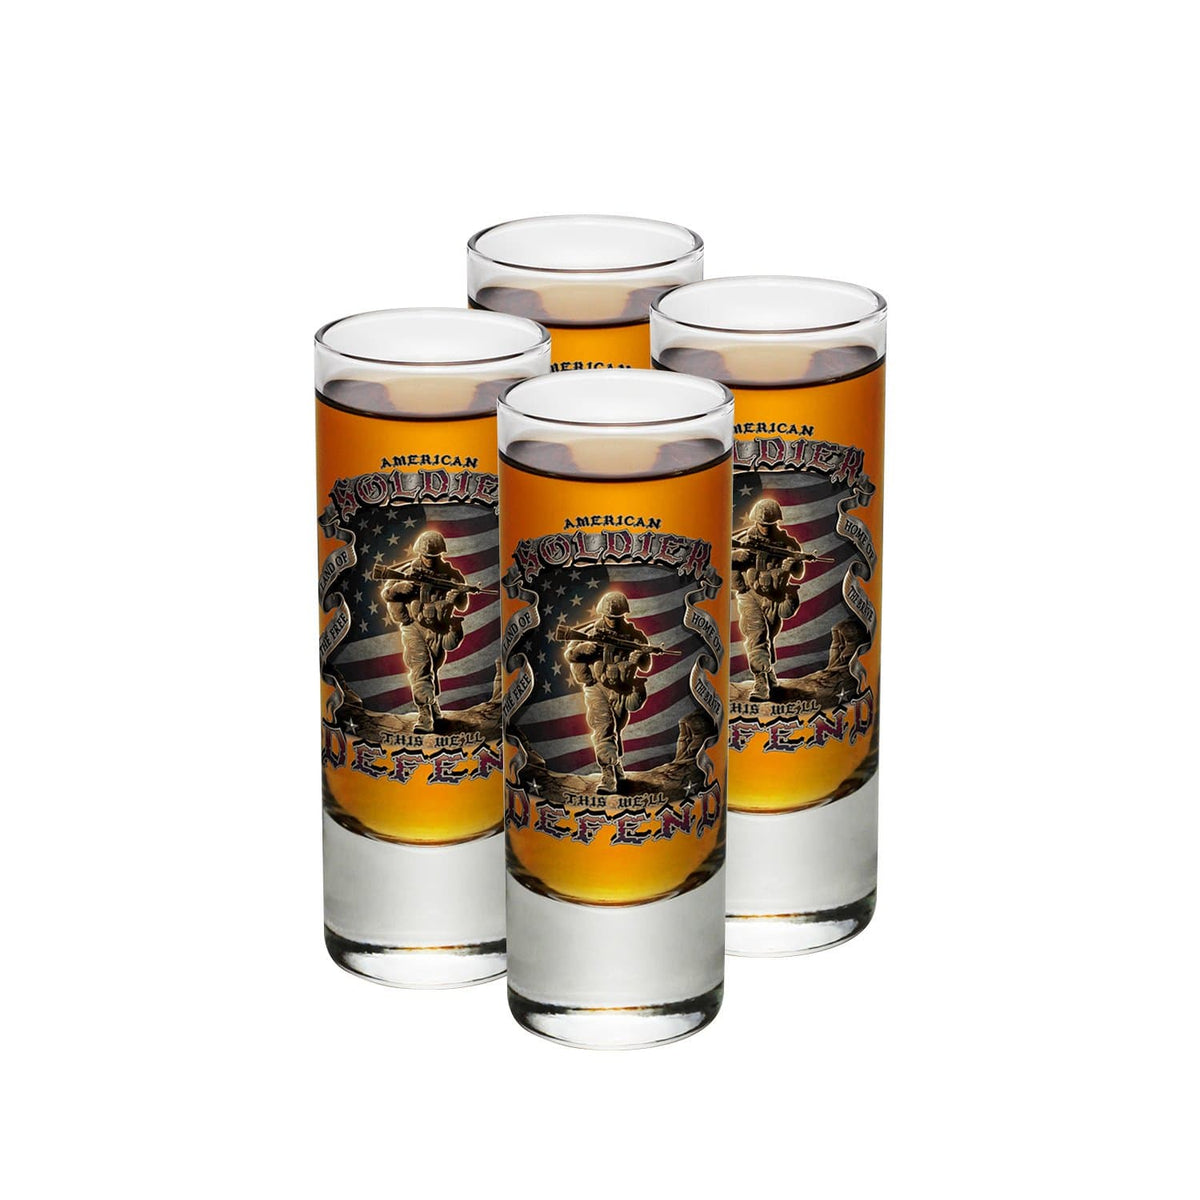 American Soldier Shooter Shot Glass